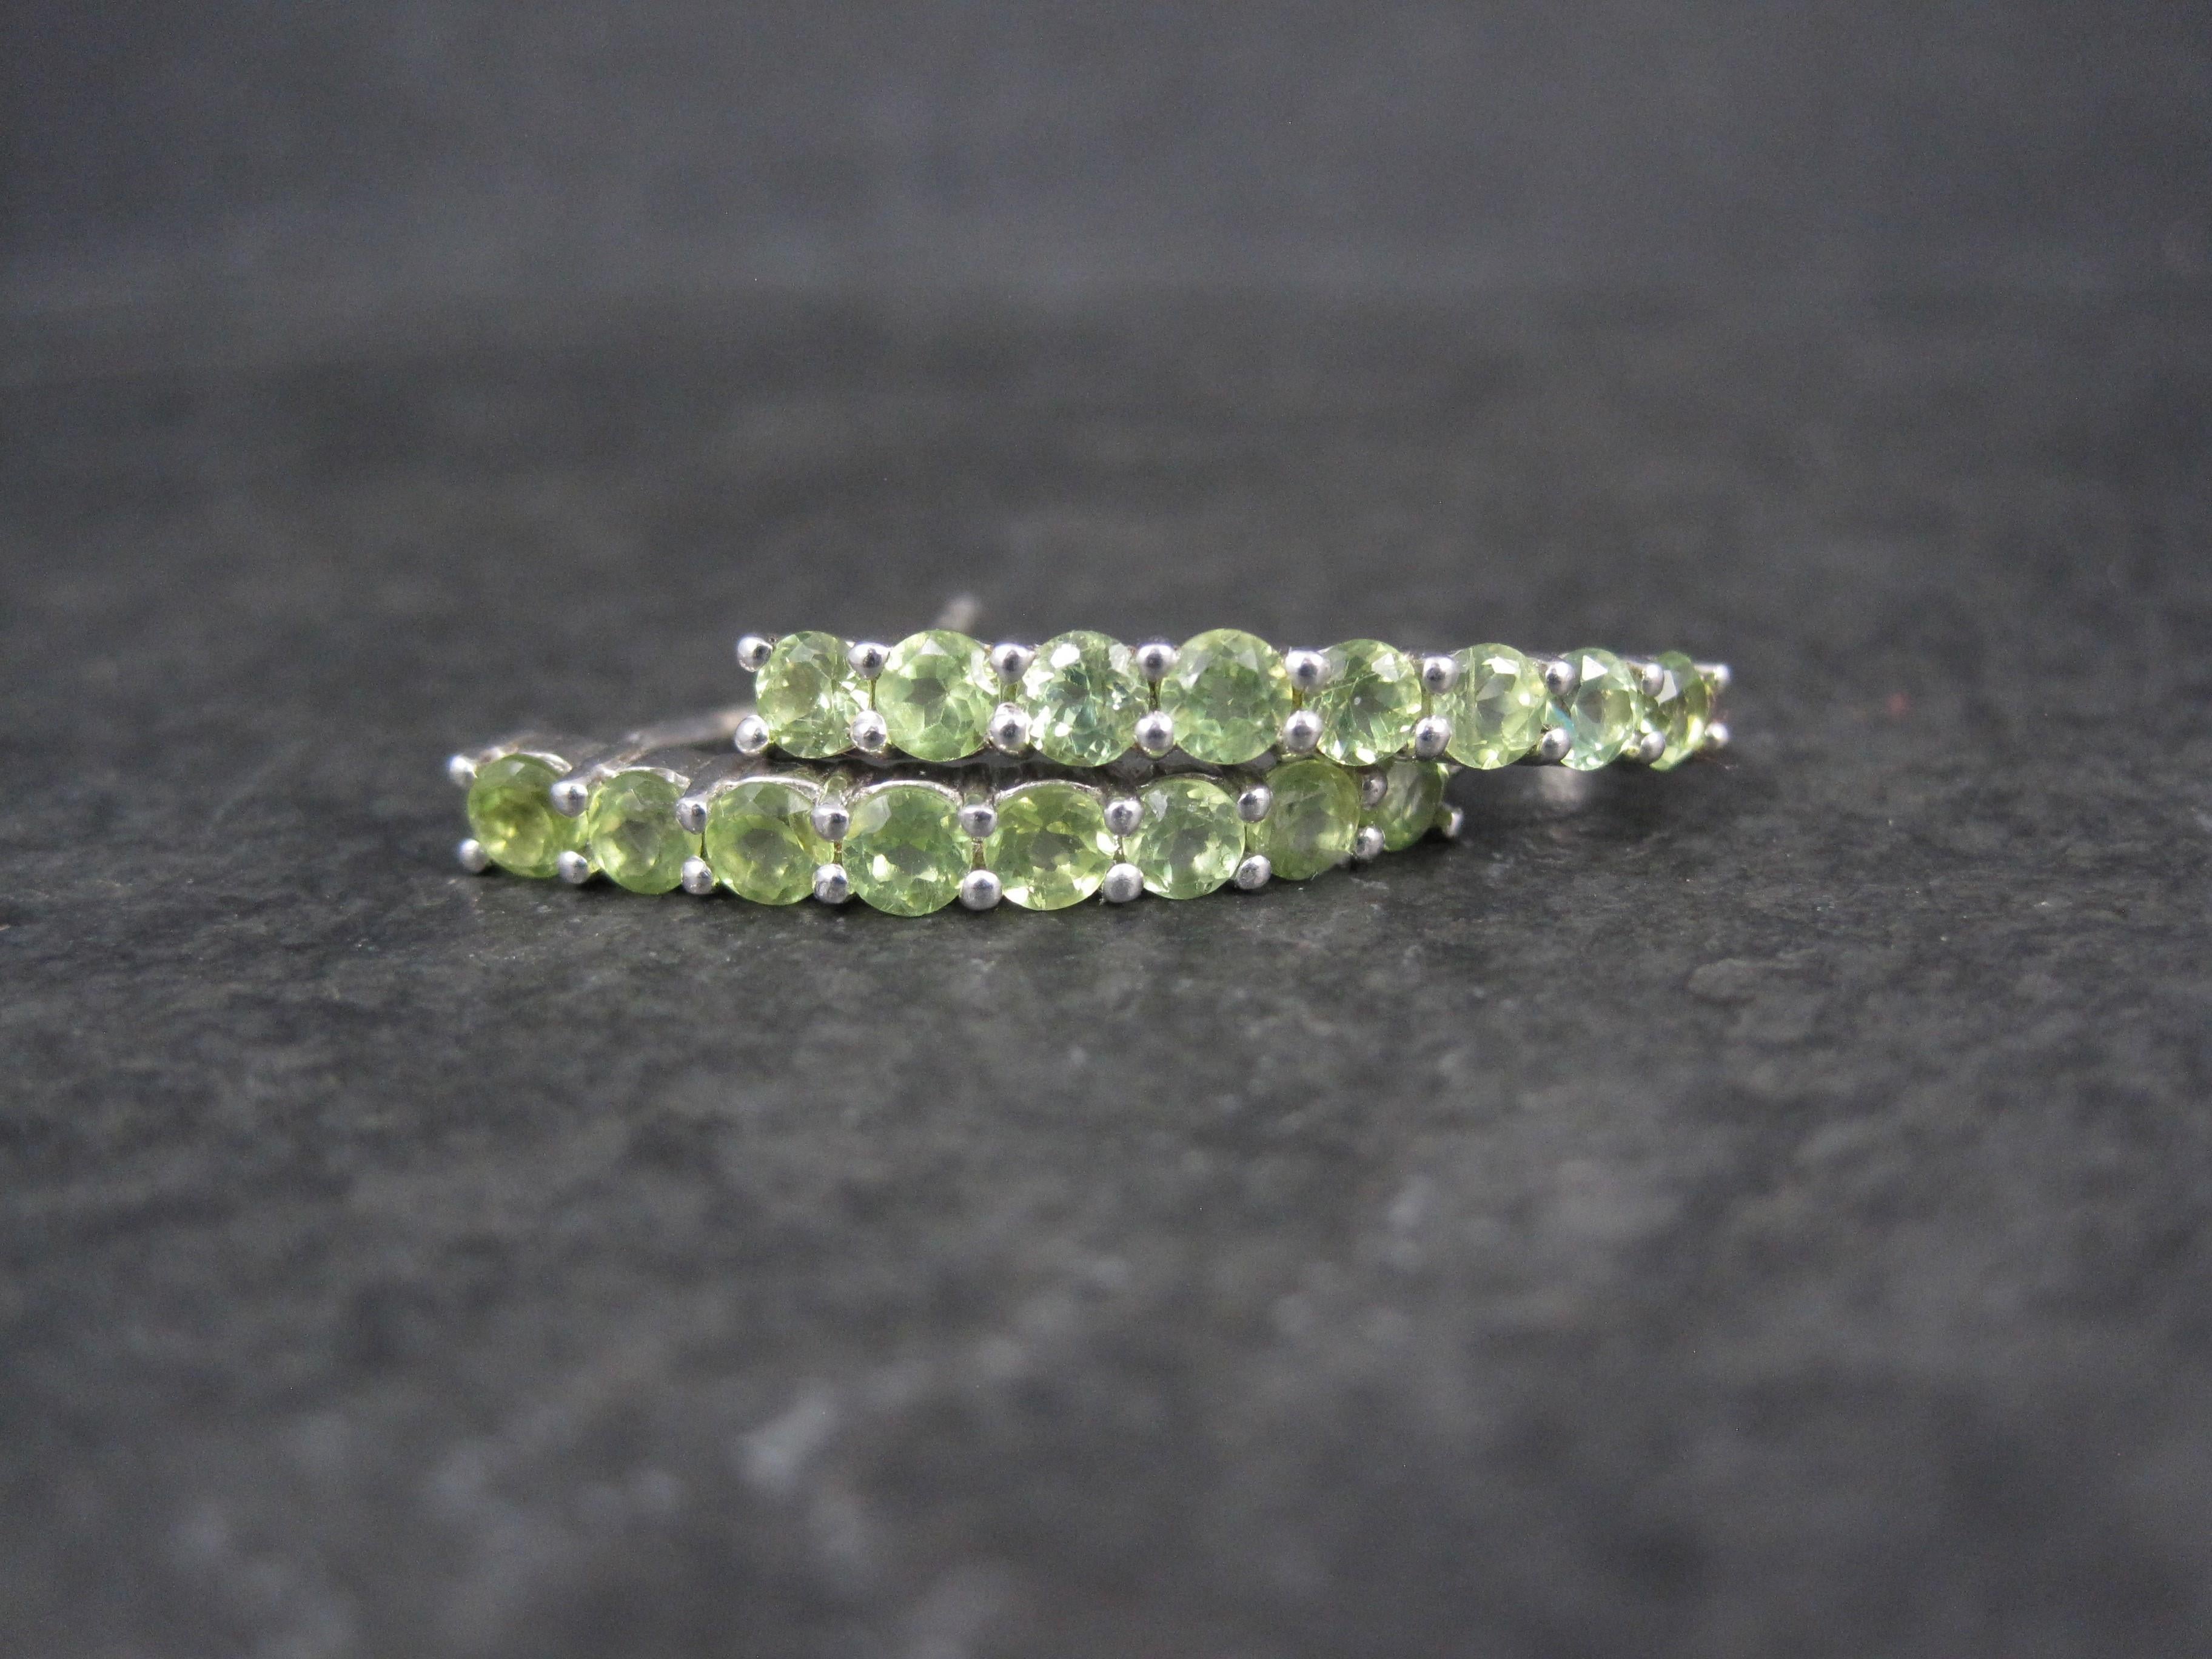 These beautiful earrings are sterling silver.
The pair features 16 round cut, 3mm peridot gemstones.
Measurements: 1/8 by 1 inch
Weight: 3.3 grams
Condition: New old stock